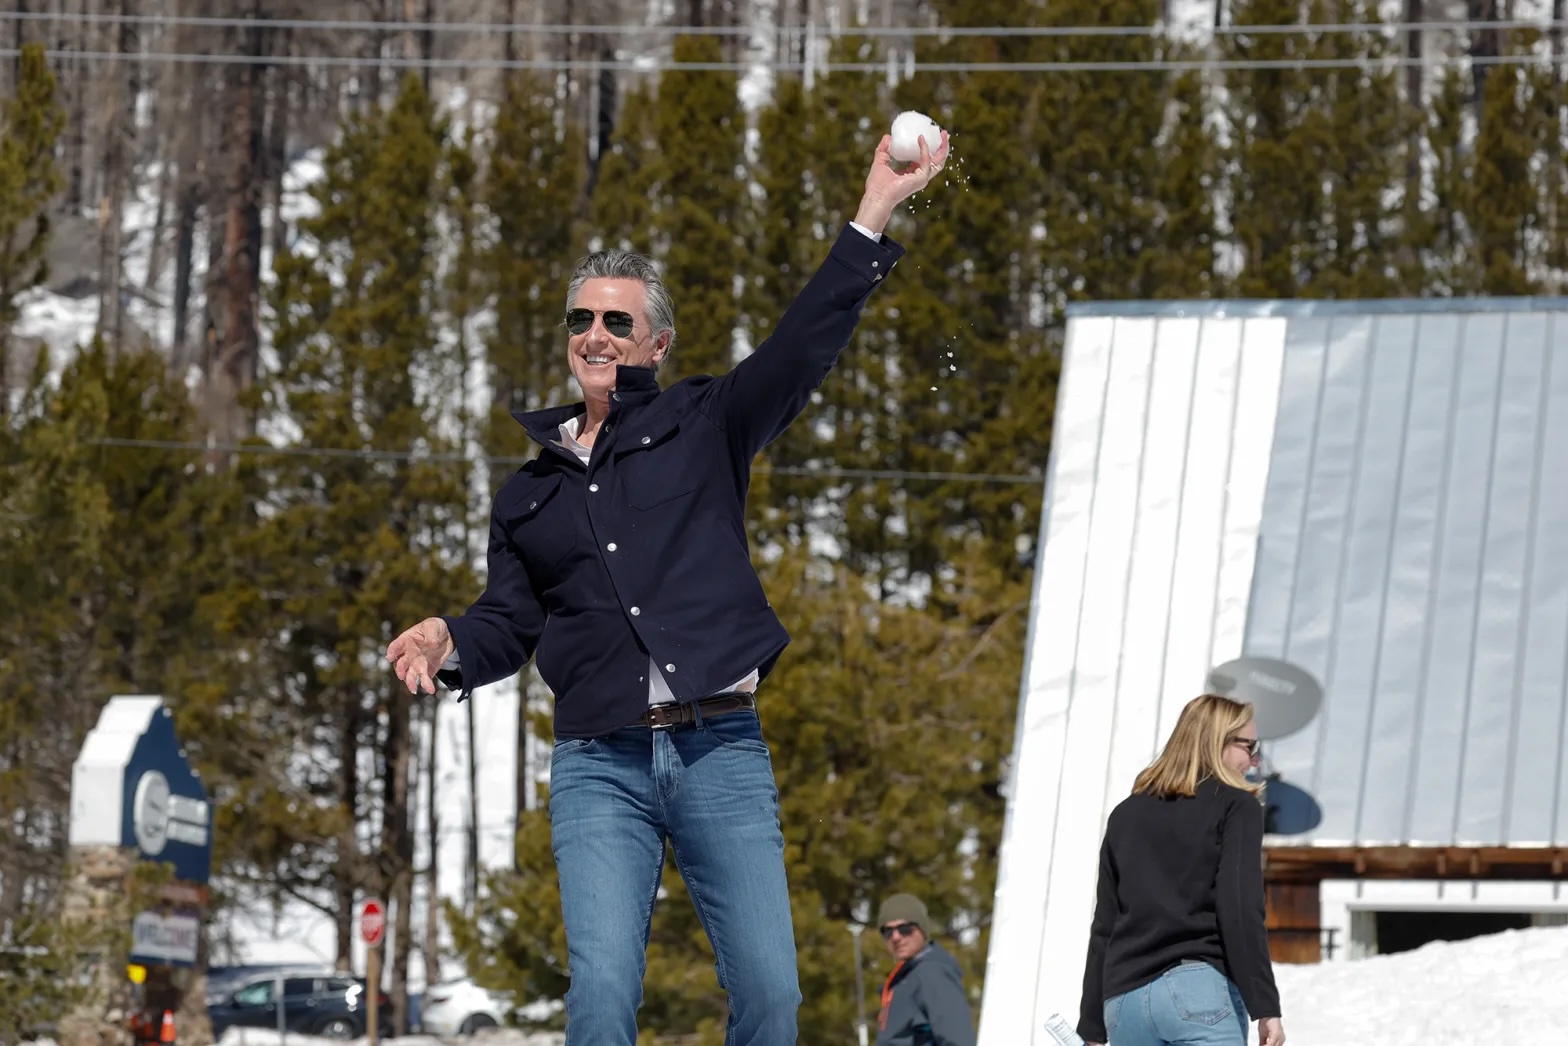 A middle-aged white man wearing jeans and a blue buttoned shirt and sunglasses throws a snowball with snow and trees in the background.